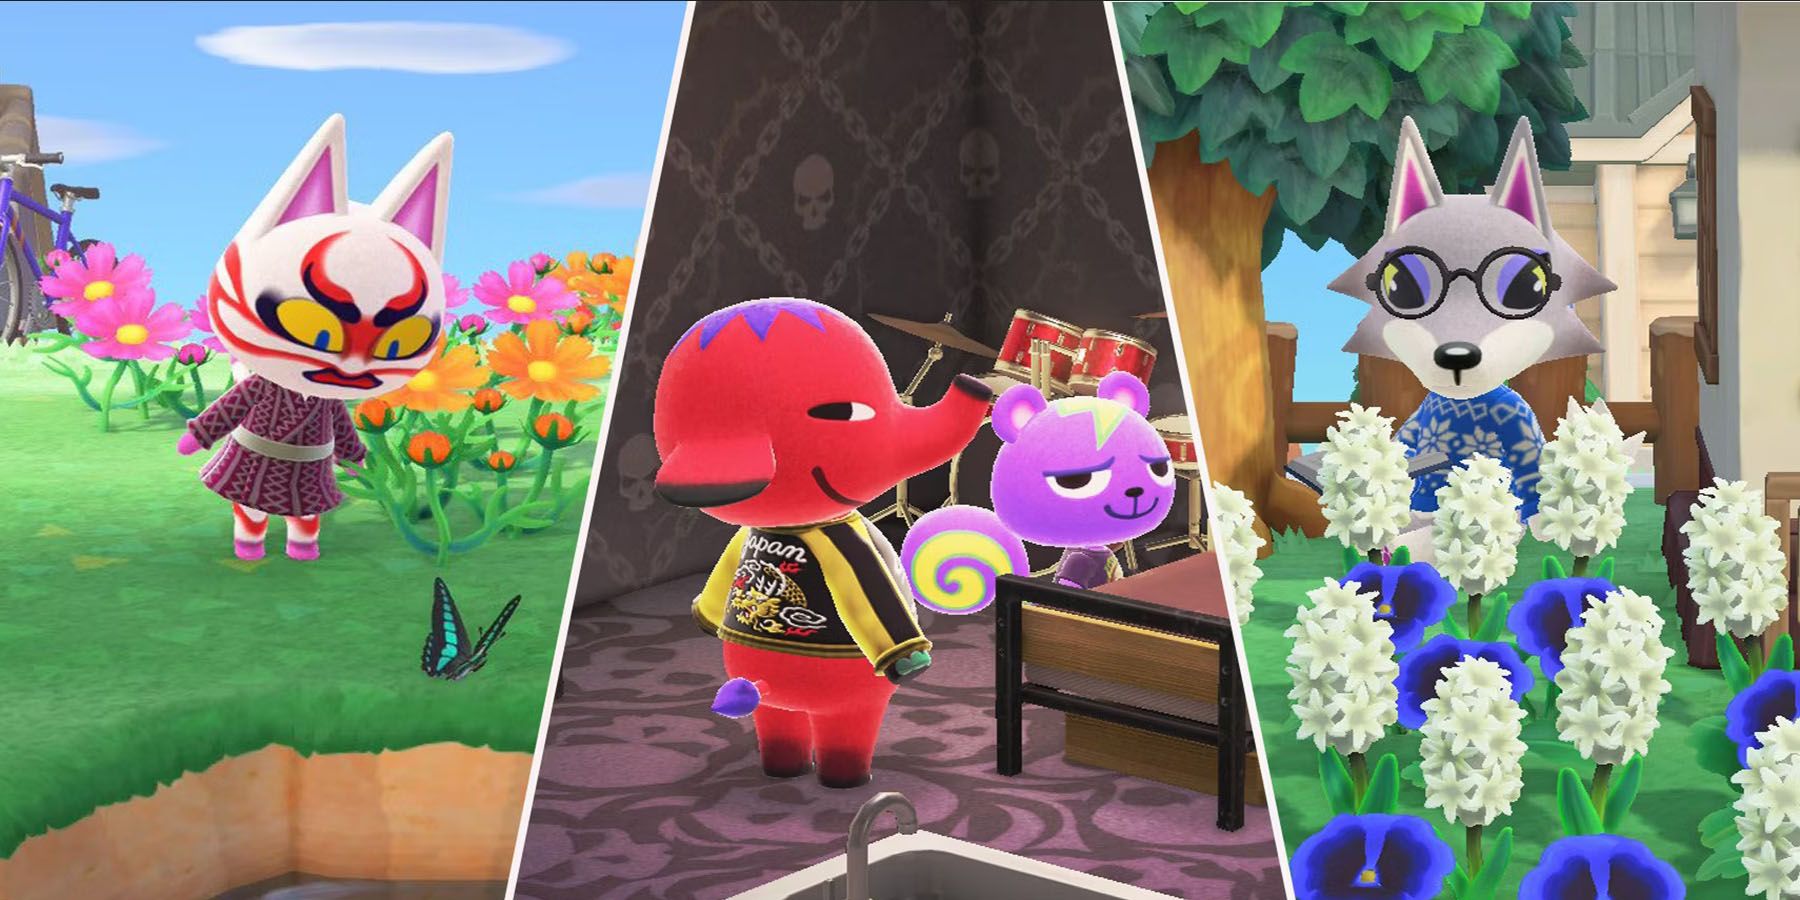 A collage of three grumpy villagers, including Kabuki, a Japanese cat with distinct facial markings who gazes intently at a butterfly, Cyd, a red elephant who smugly looks on at band practice, and Fang, a gray fox who appreciates flowers.